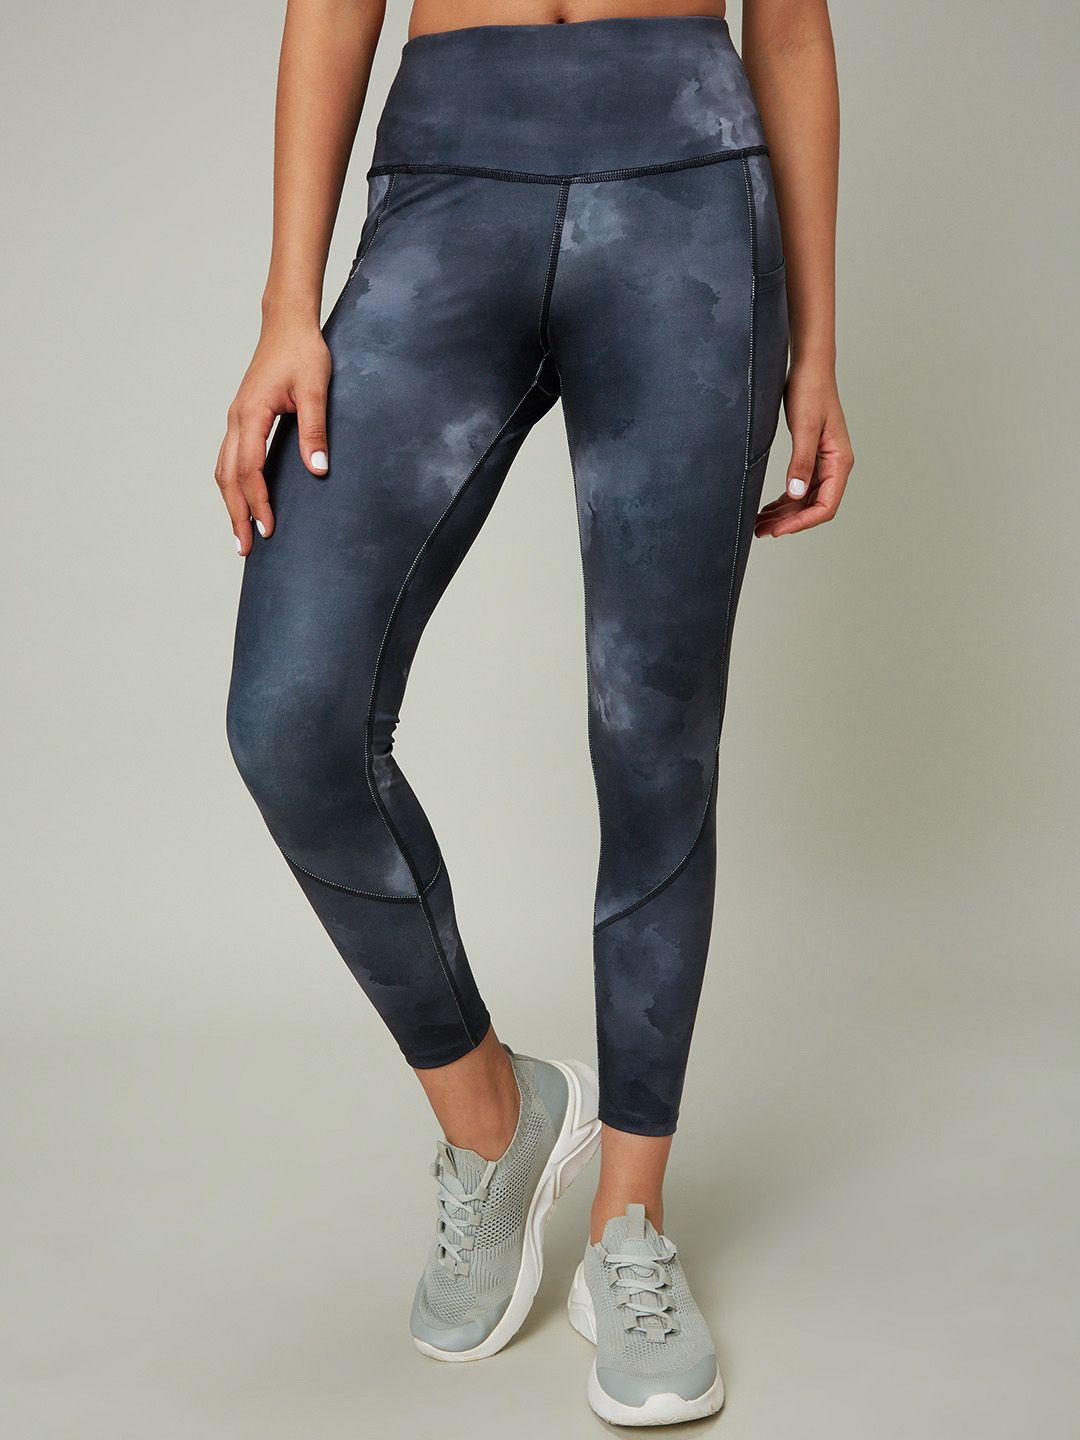 silvertraq-women-abstract-printed-ankle-length-leggings